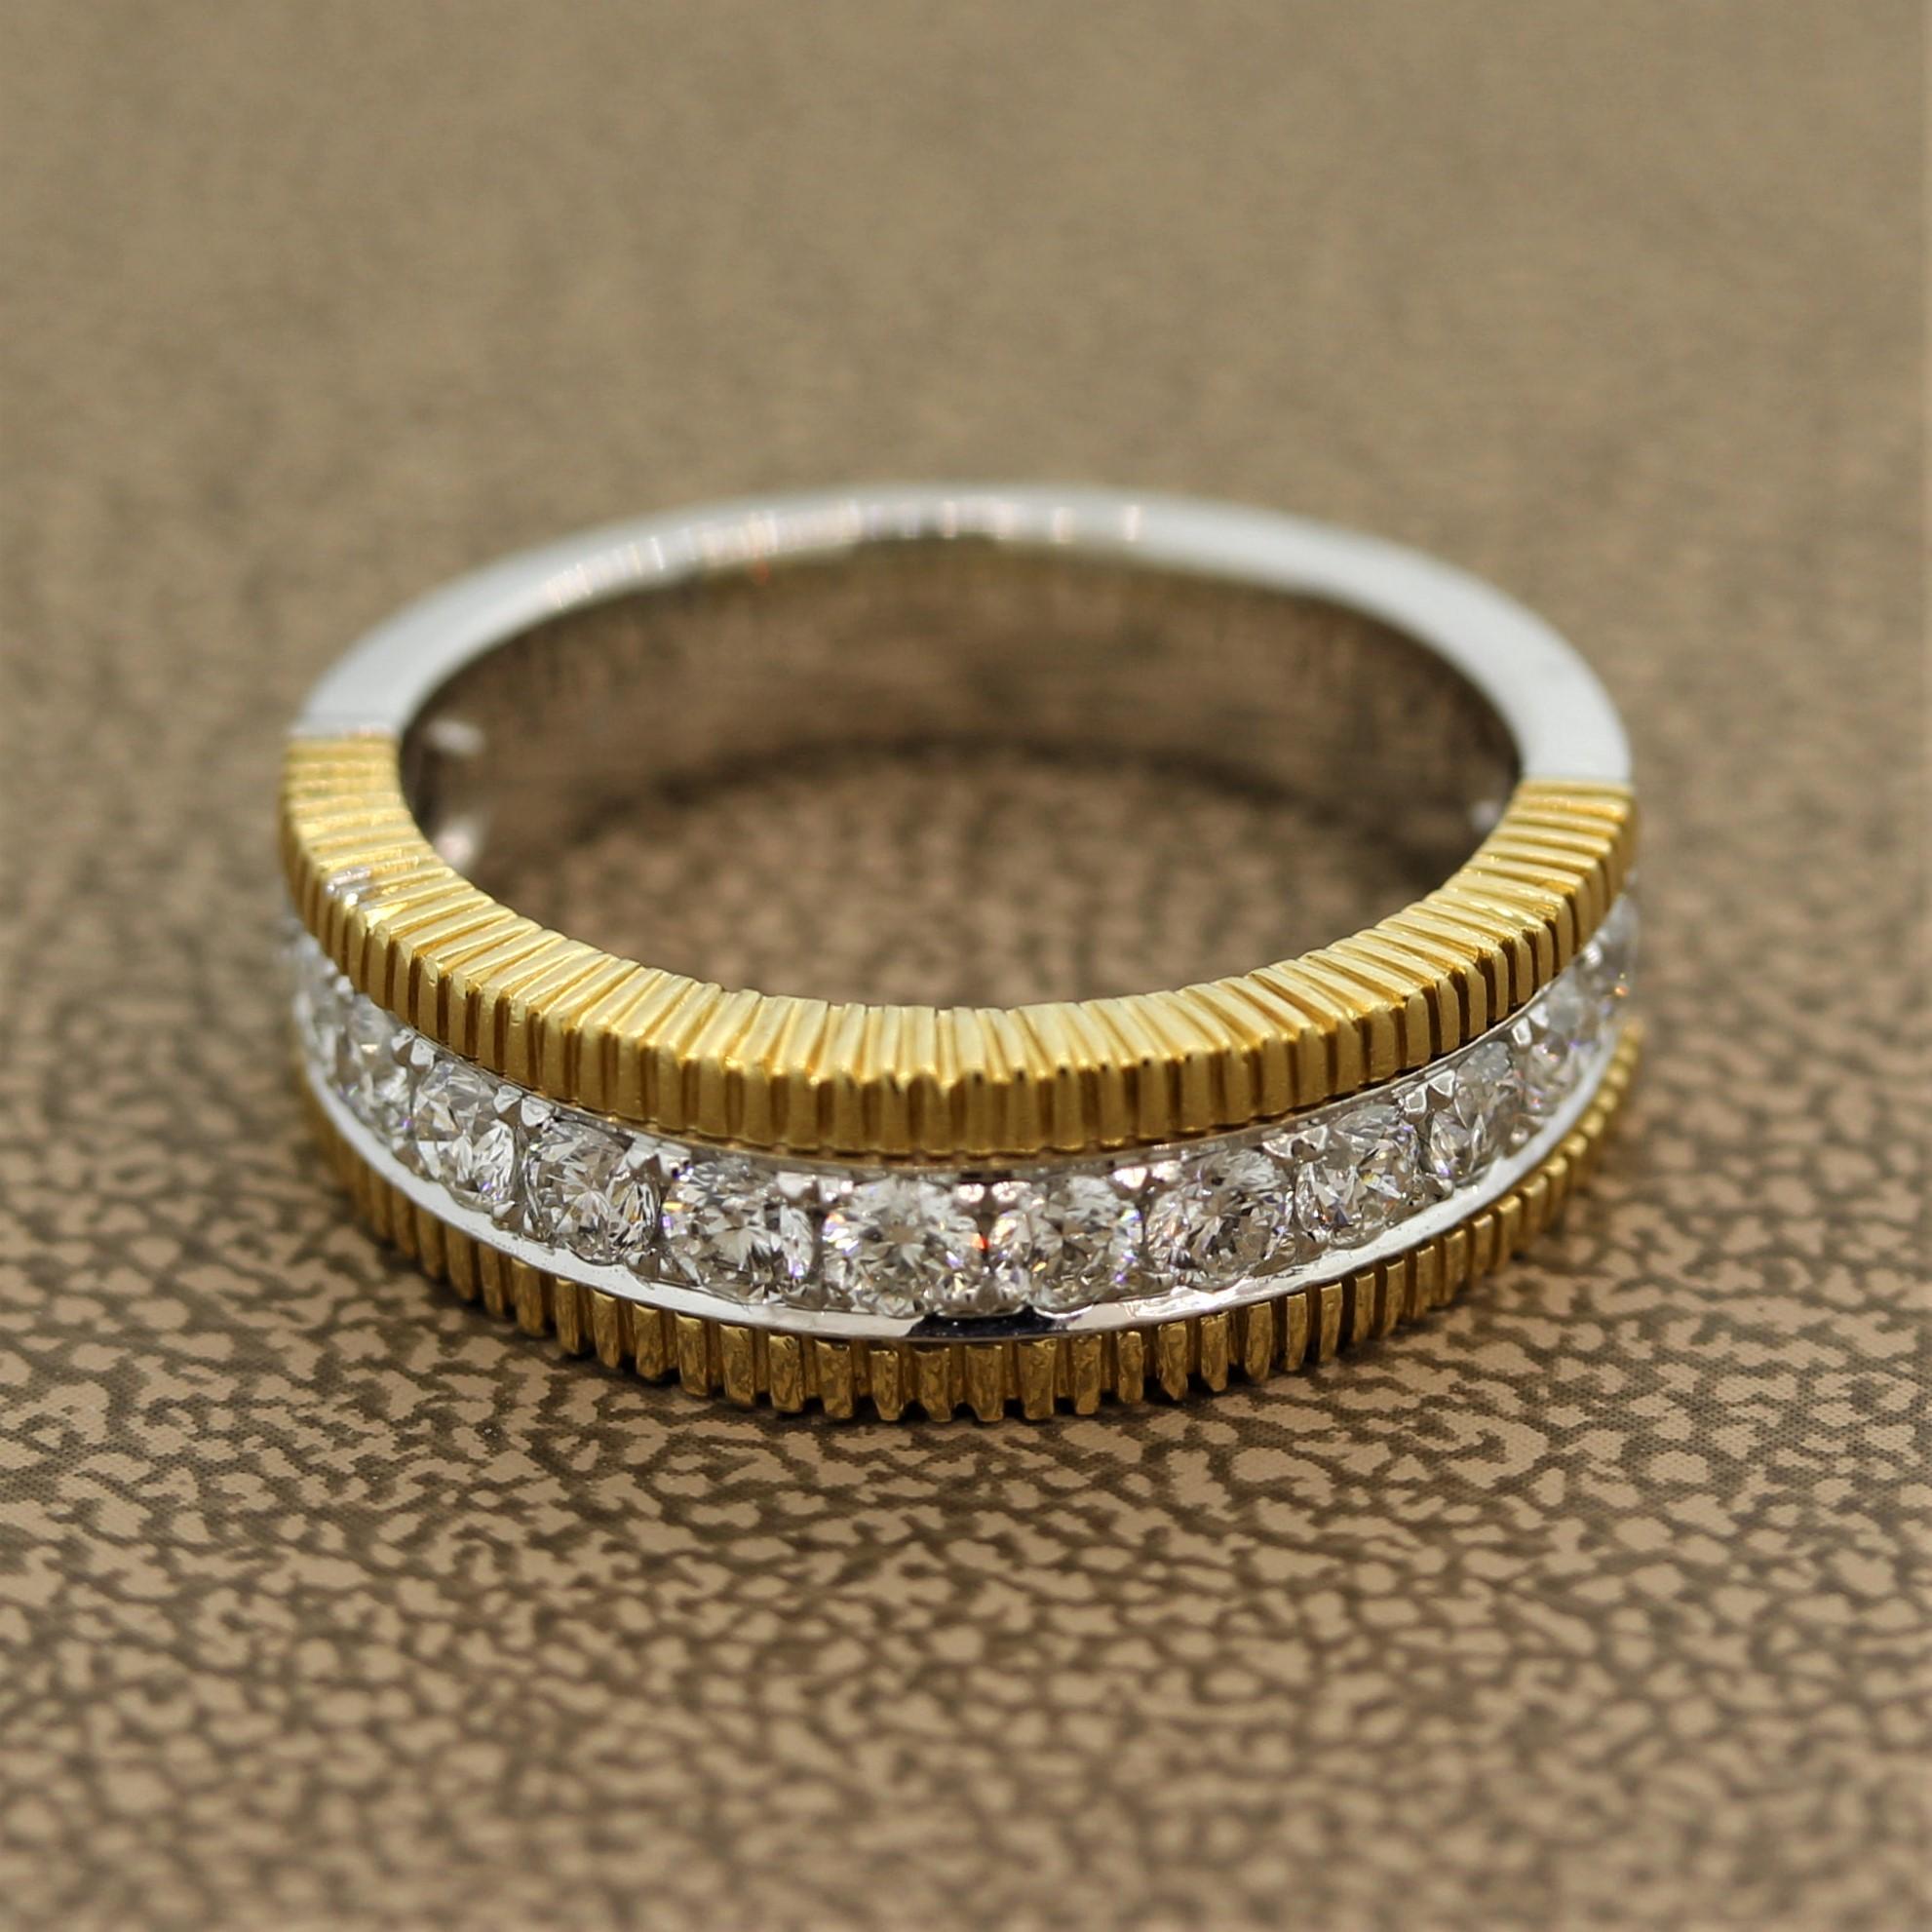 One of my favorite diamond bands in our collection, this particular piece is made of both 18k white and yellow gold. It features 0.73 carats of round brilliant cut diamonds set in 18k white gold with a yellow gold carved border. Ready to be worn